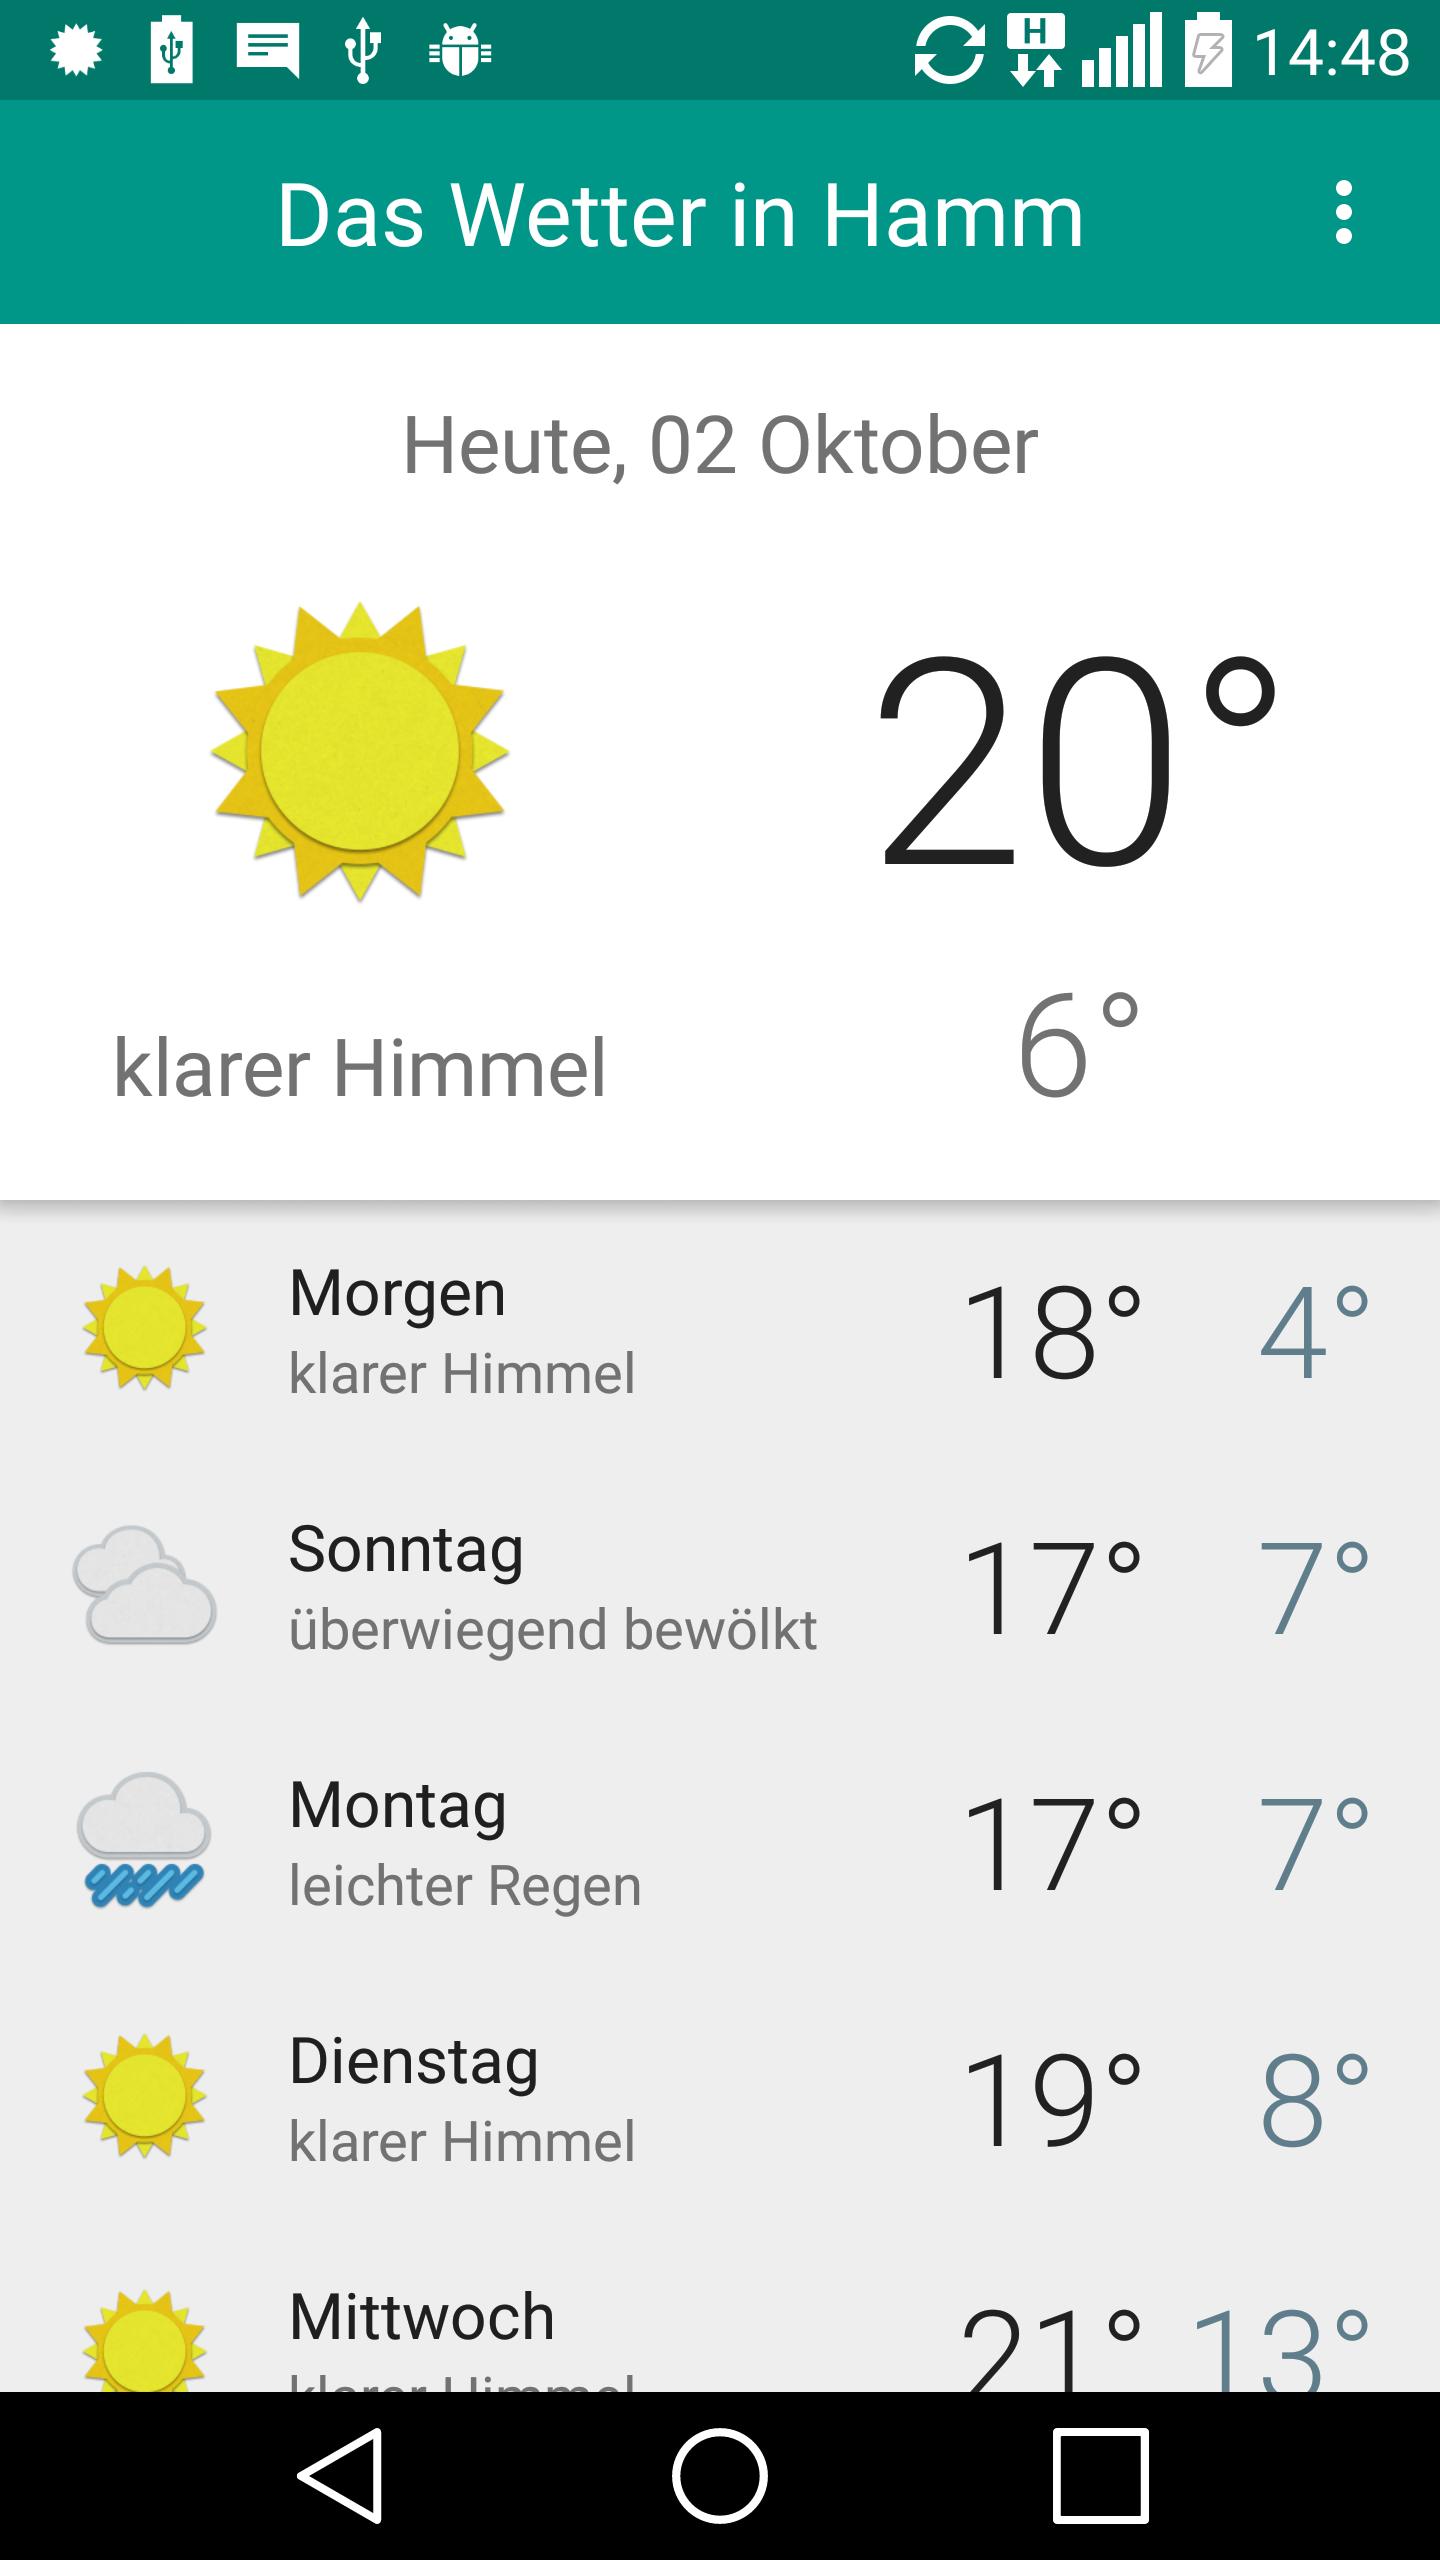 Hamm - Das Wetter for Android - APK Download